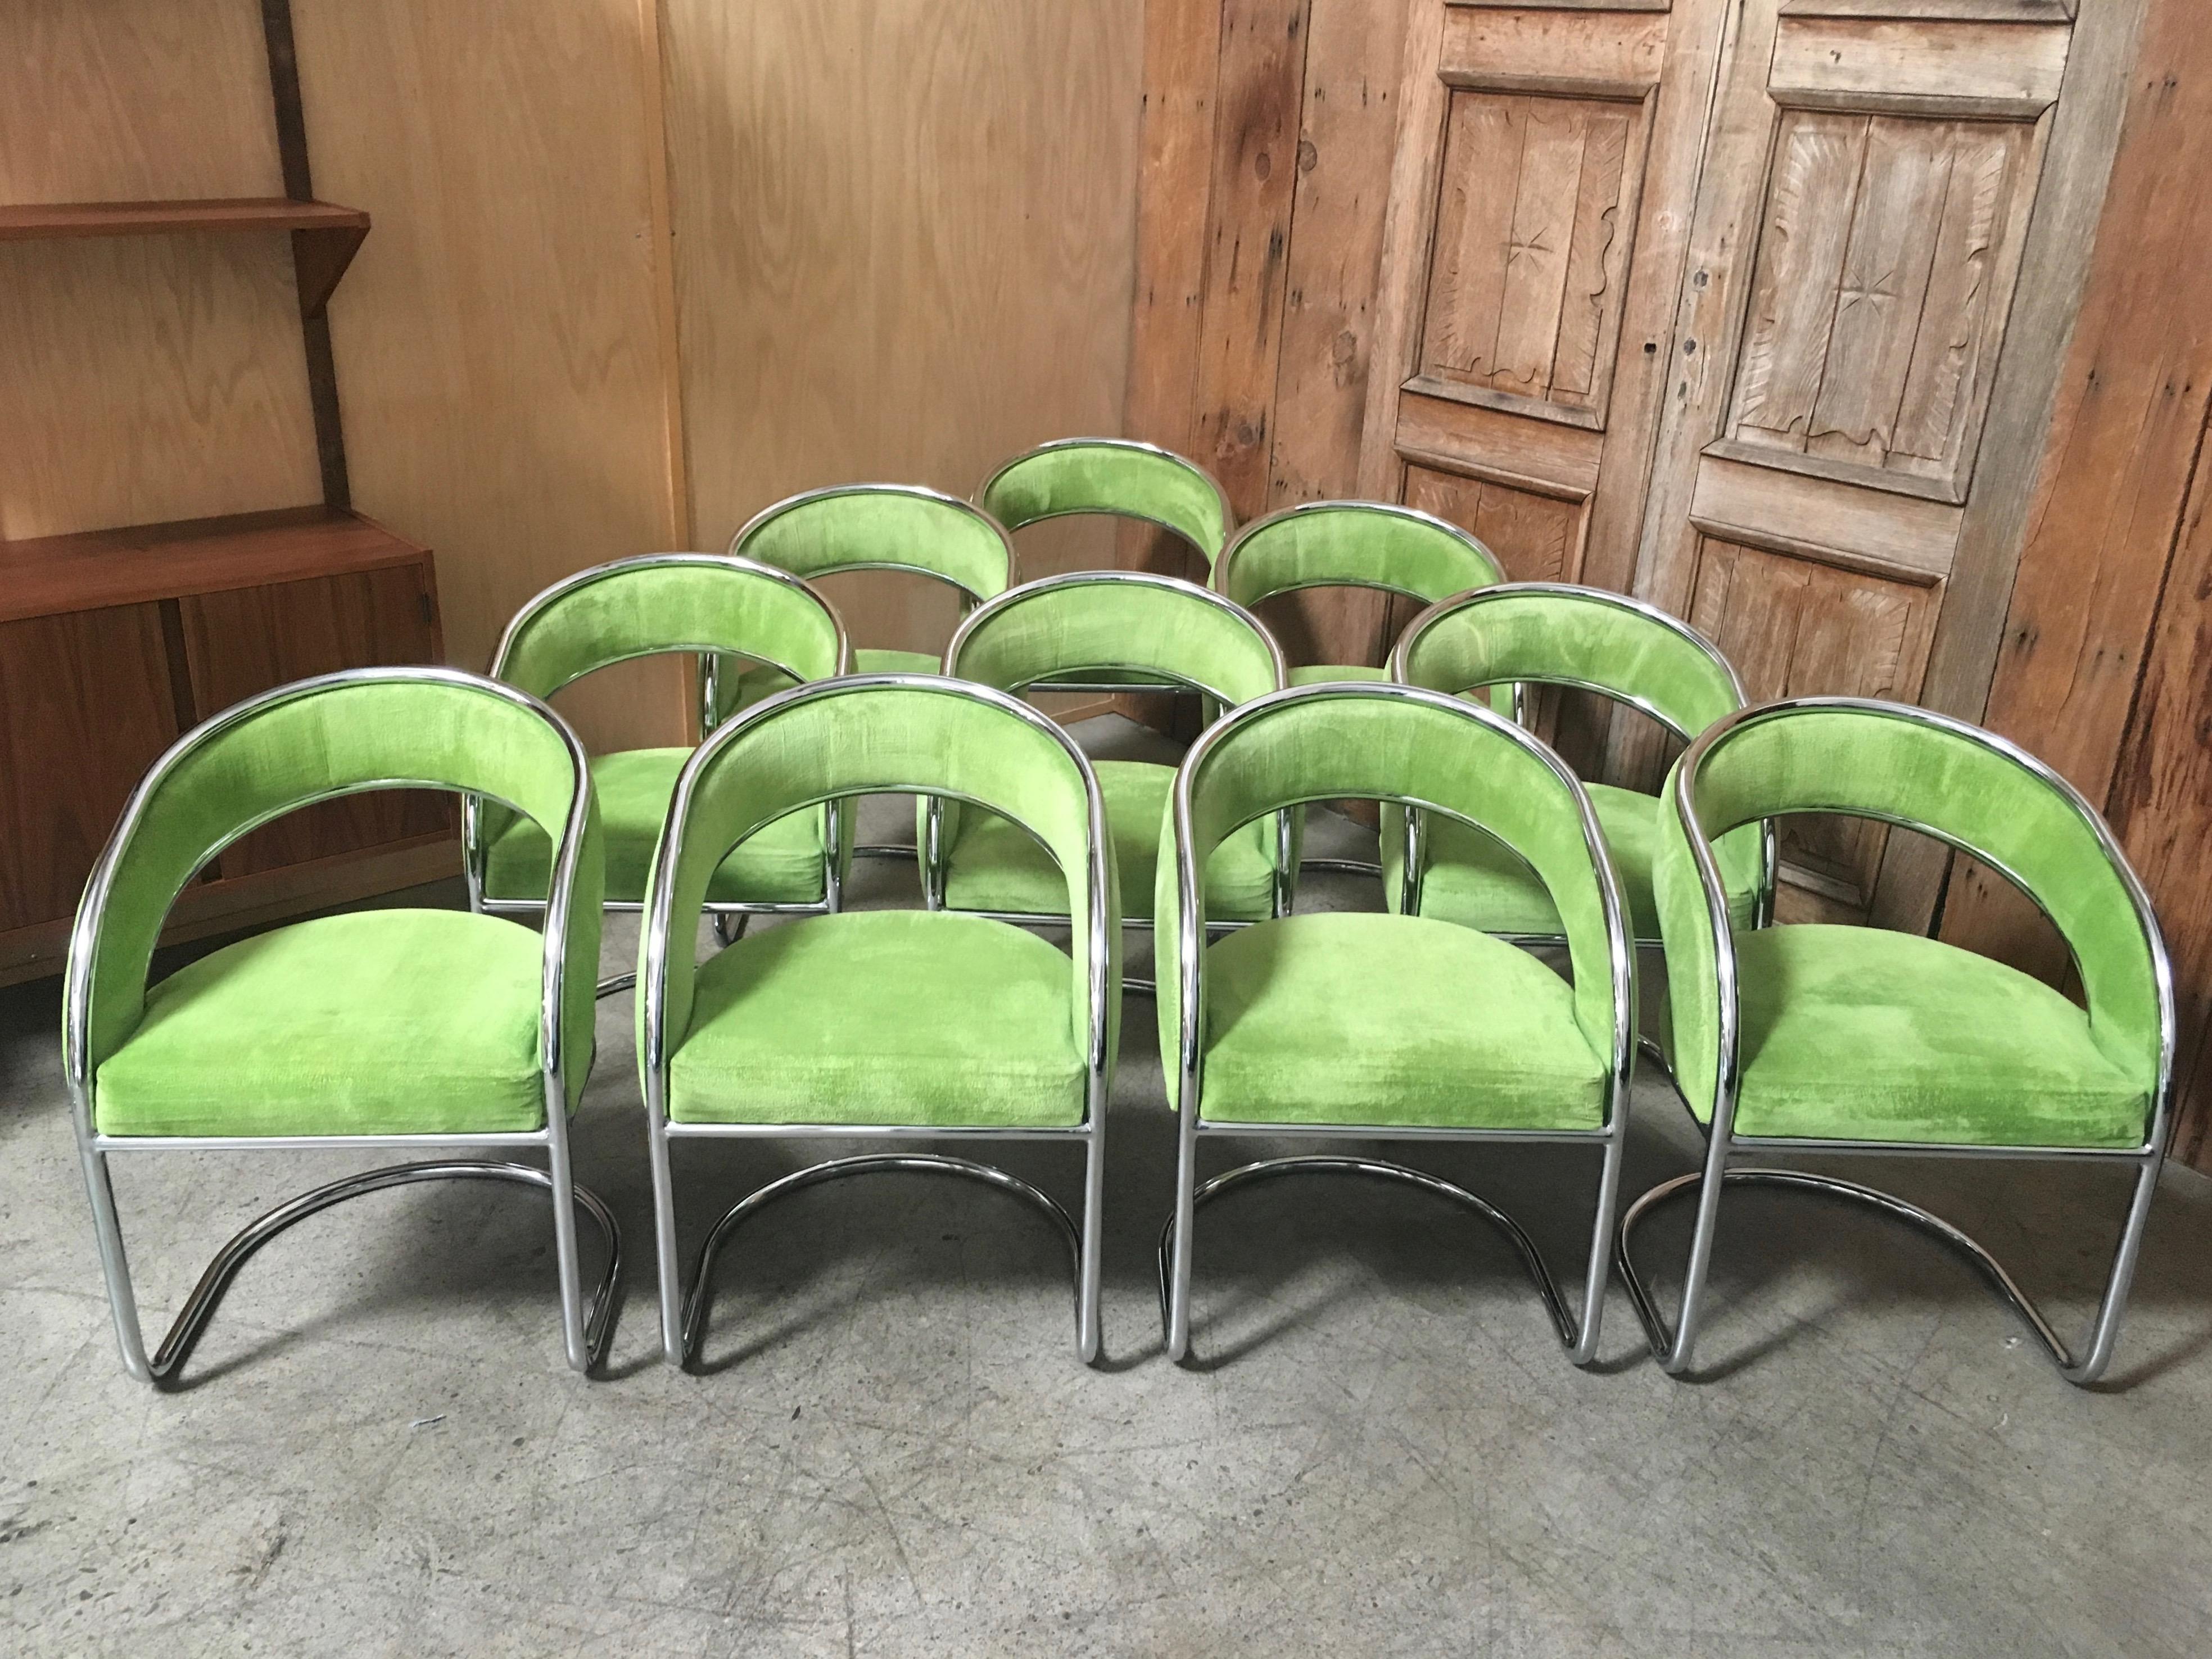 Set of 10 cantilevered dining chairs made by Contemporary Shells inc.
Contemporary Shell Inc was based in Hempstead NY and produced works for many designers including Arthur Umanoff.